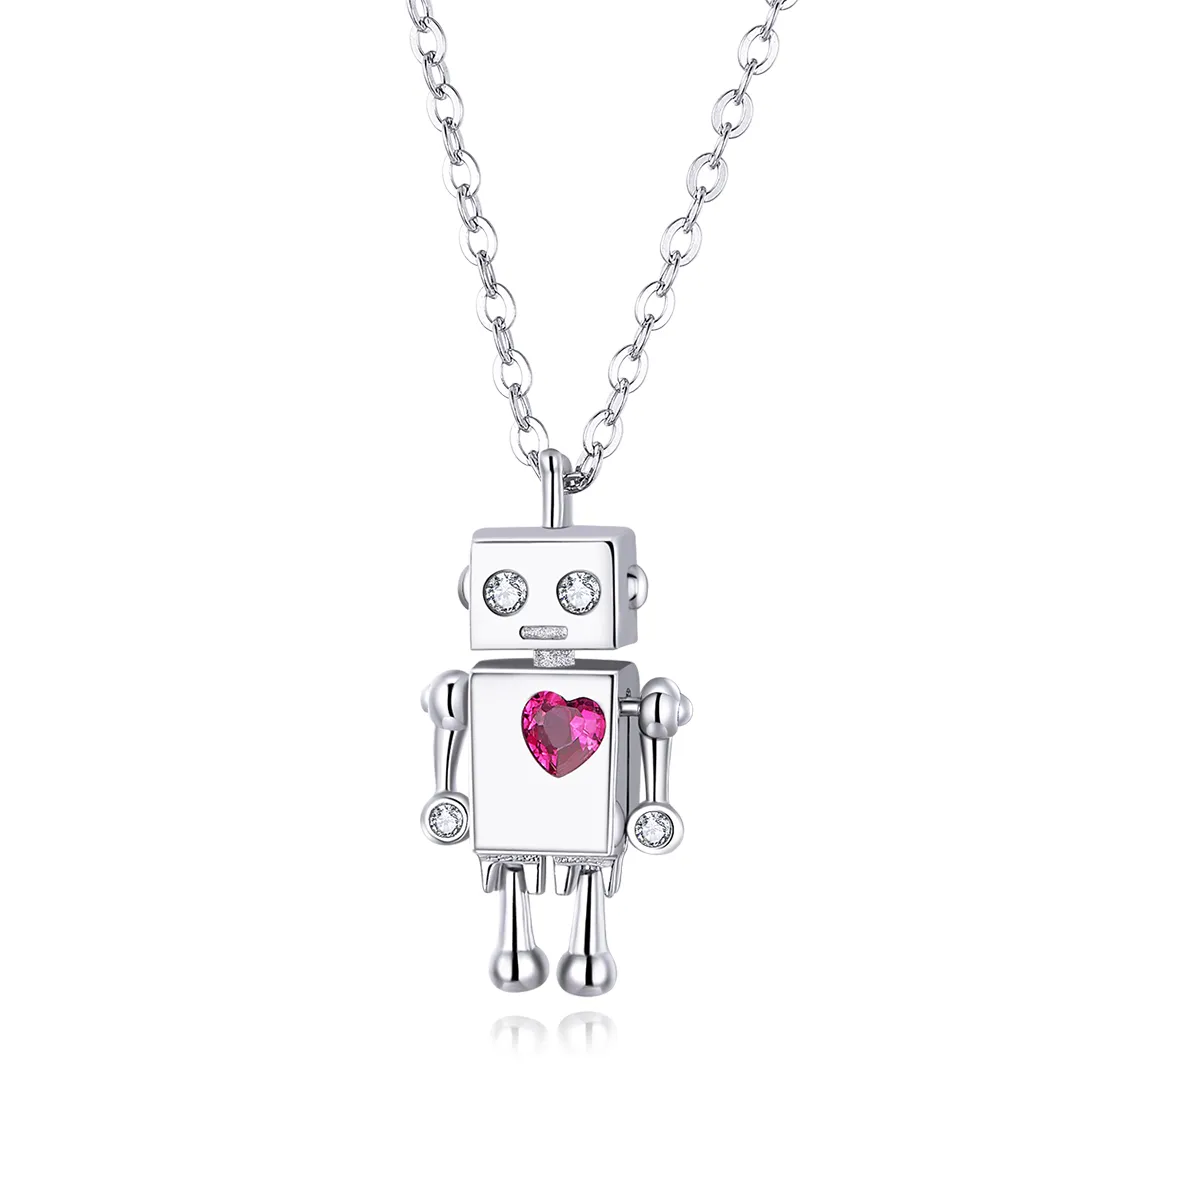 Pandora Style Silver Robot of Love Necklace - SCN388